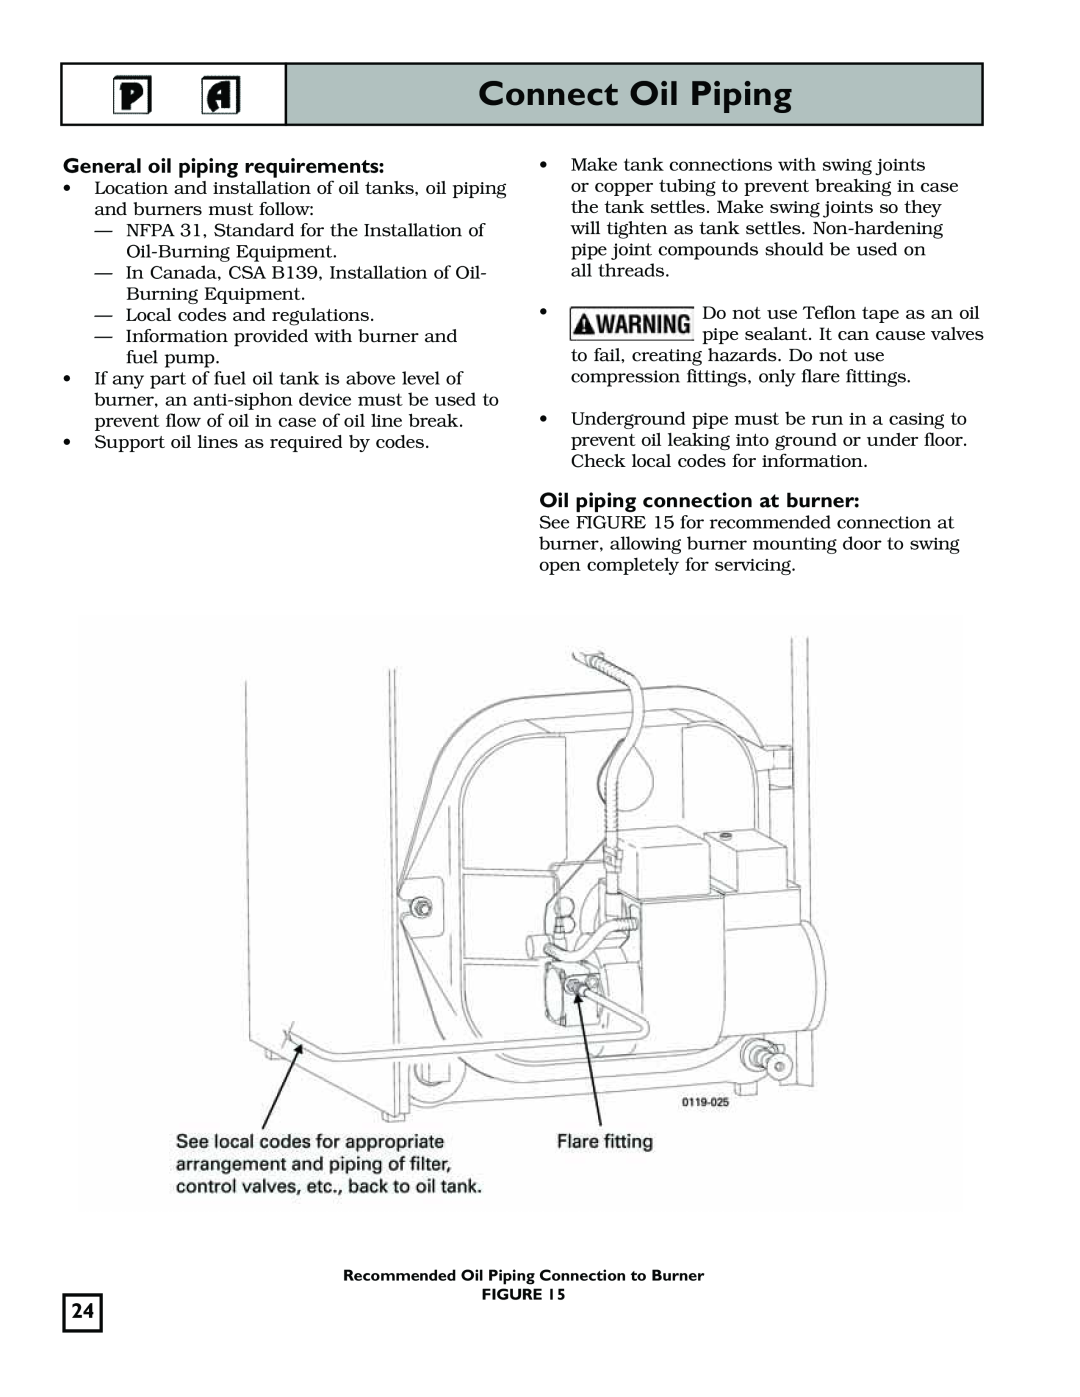 Weil-McLain 550-141-829/1201 manual Connect Oil Piping, General oil piping requirements, Oil piping connection at burner 